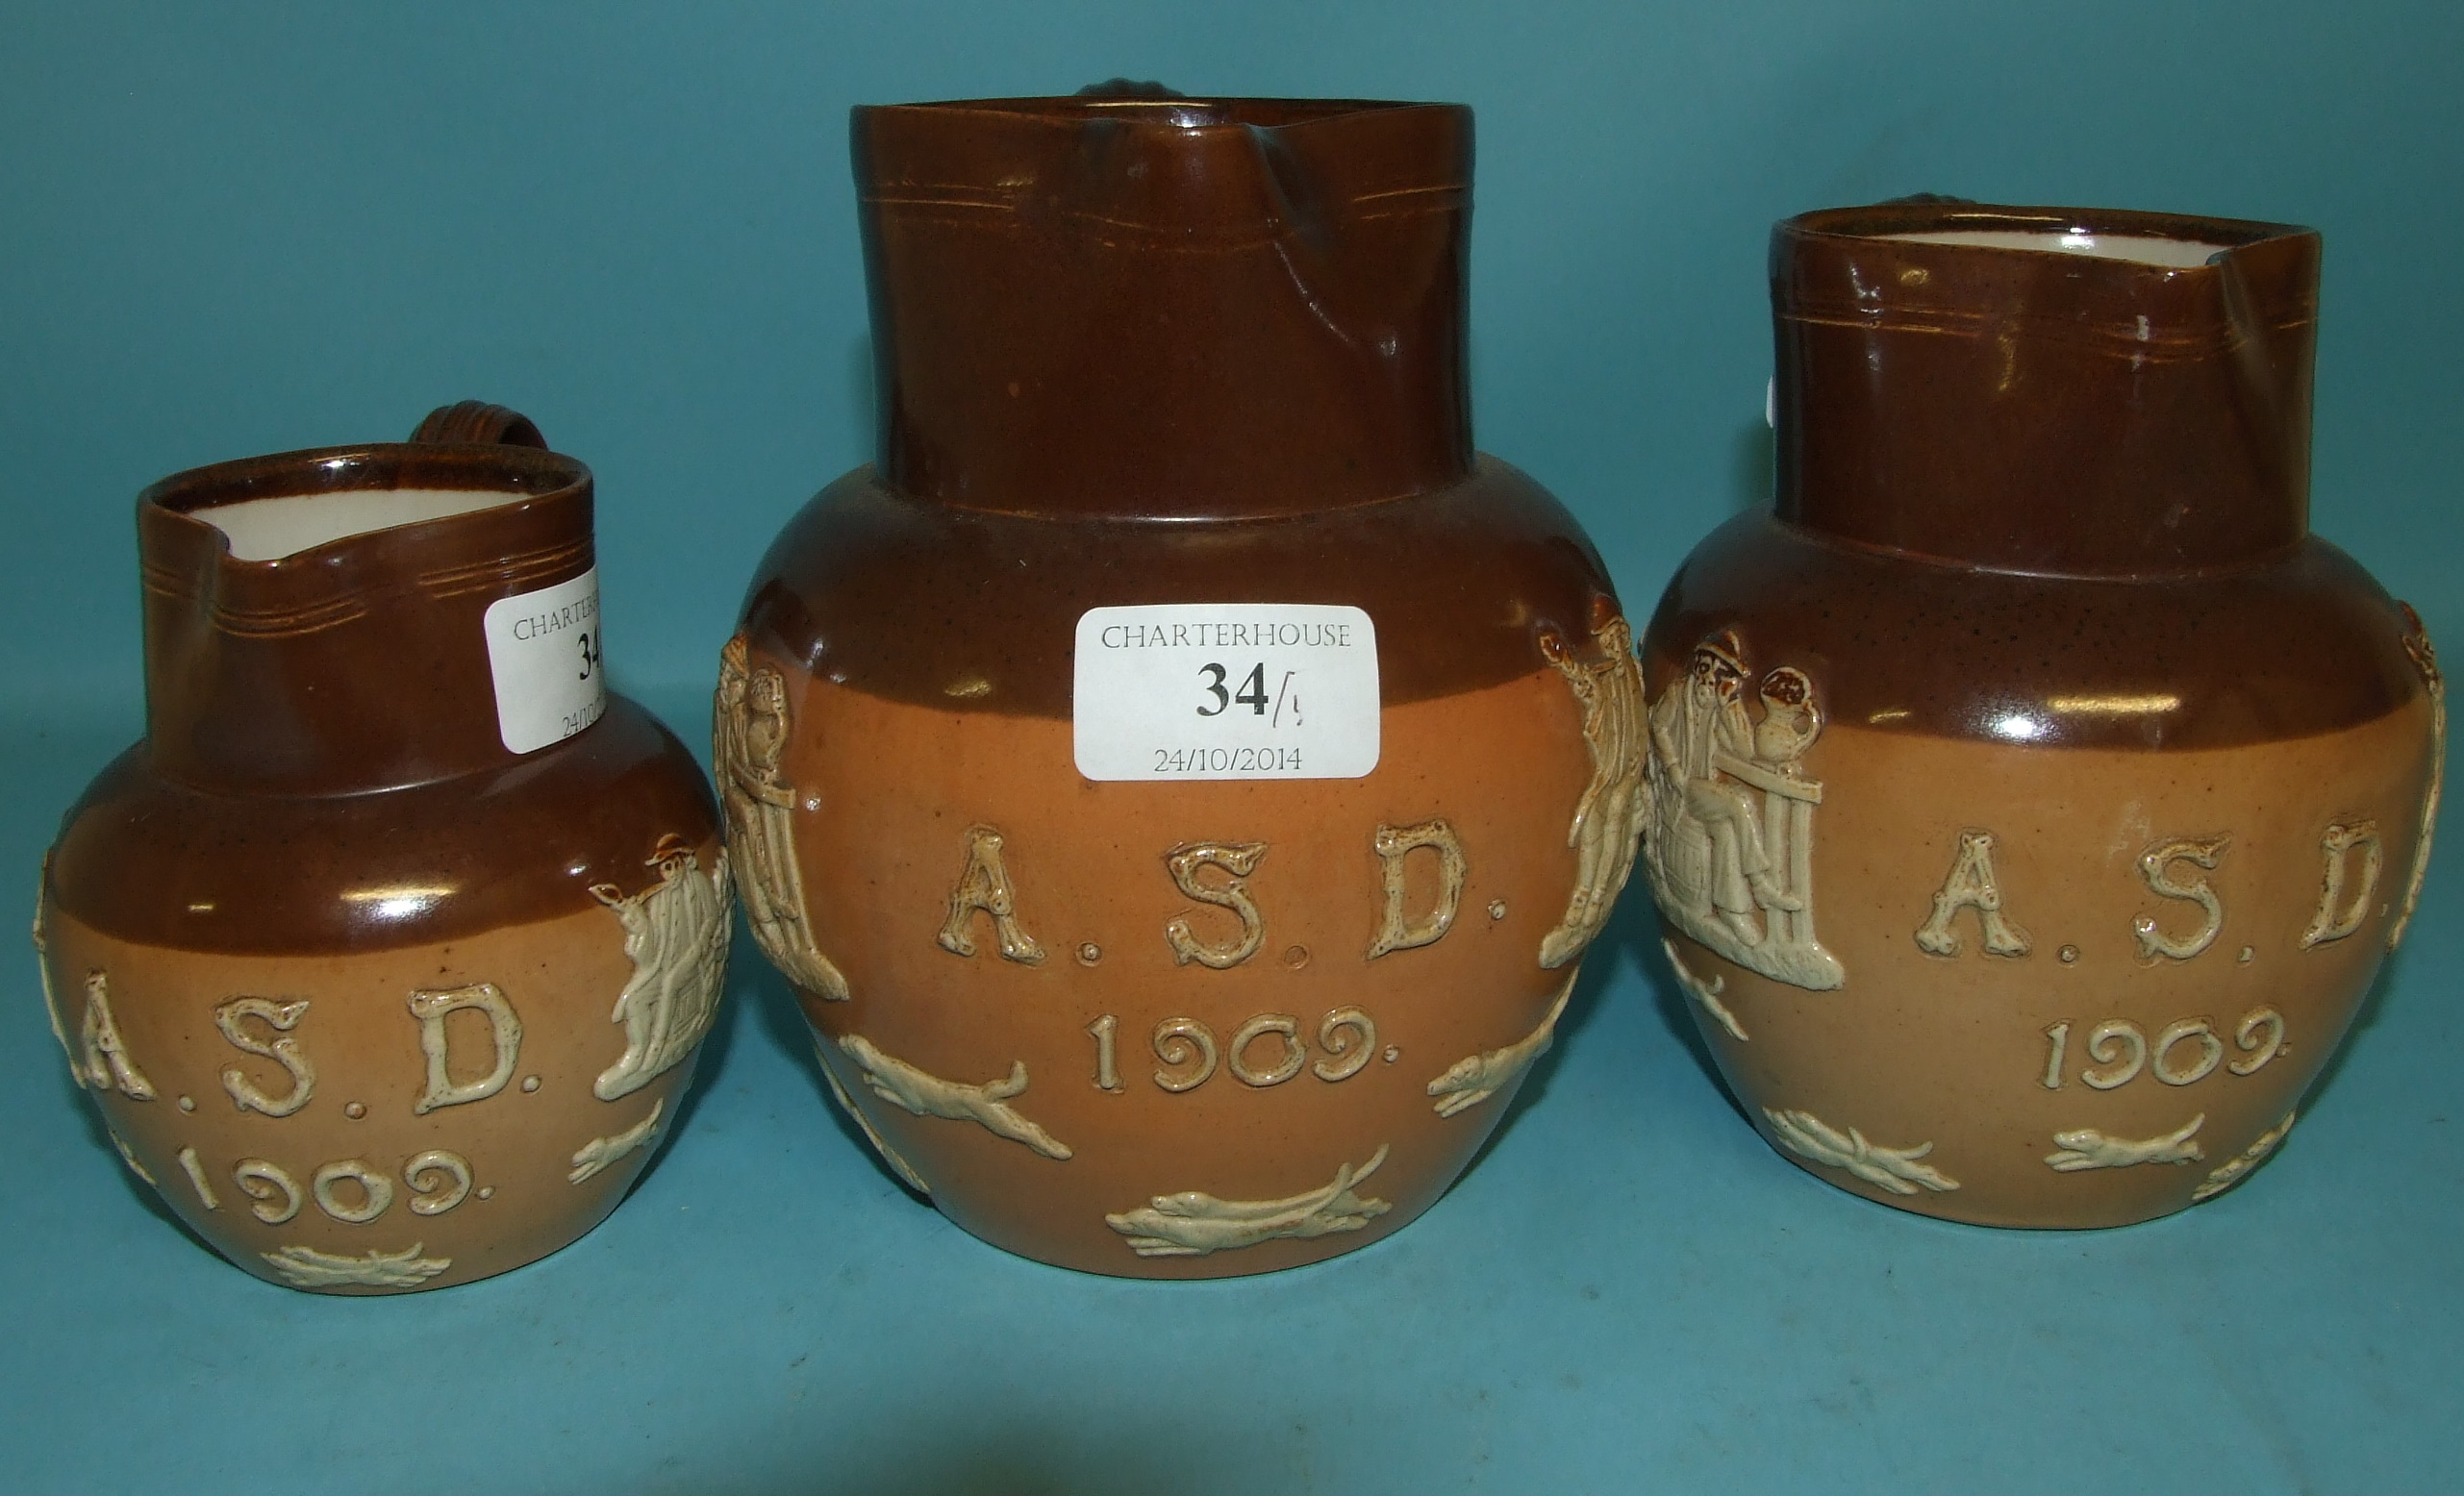 A set of three graduated Royal Doulton stoneware jugs, initialled and dated 1909, 8553, the